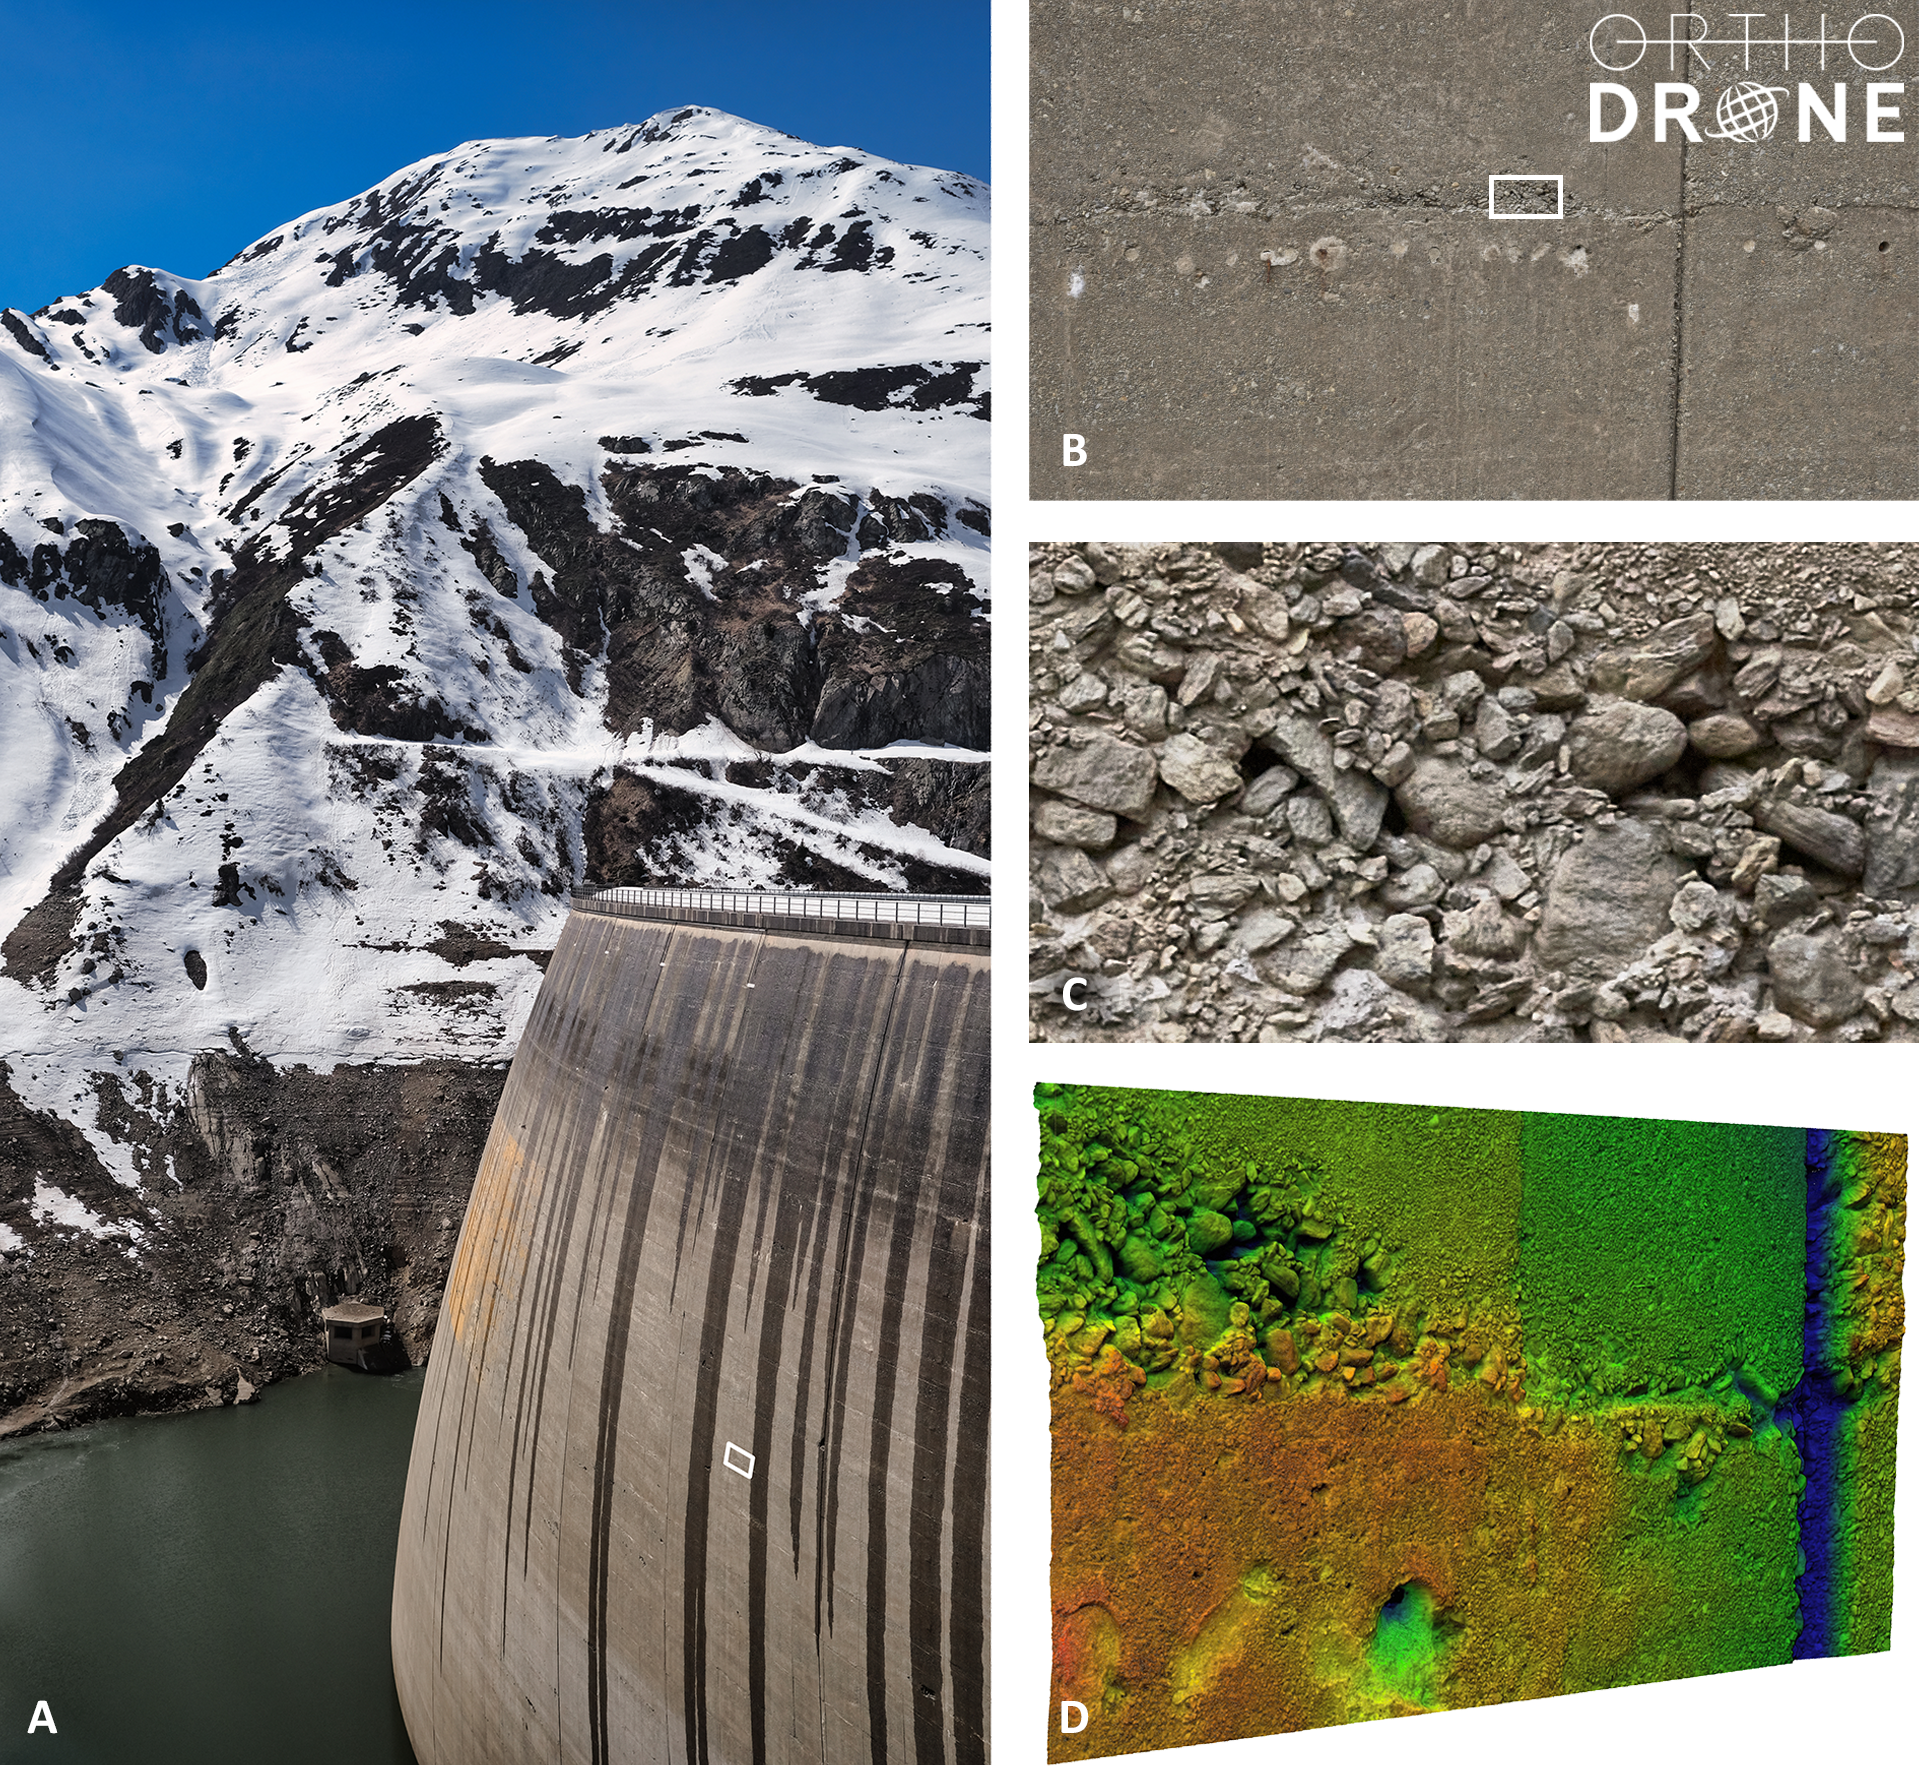 Deliverables of a sub-millimeter-resolution UAS dam survey by Orthodrone:  photogrammetry images and a 3D point cloud